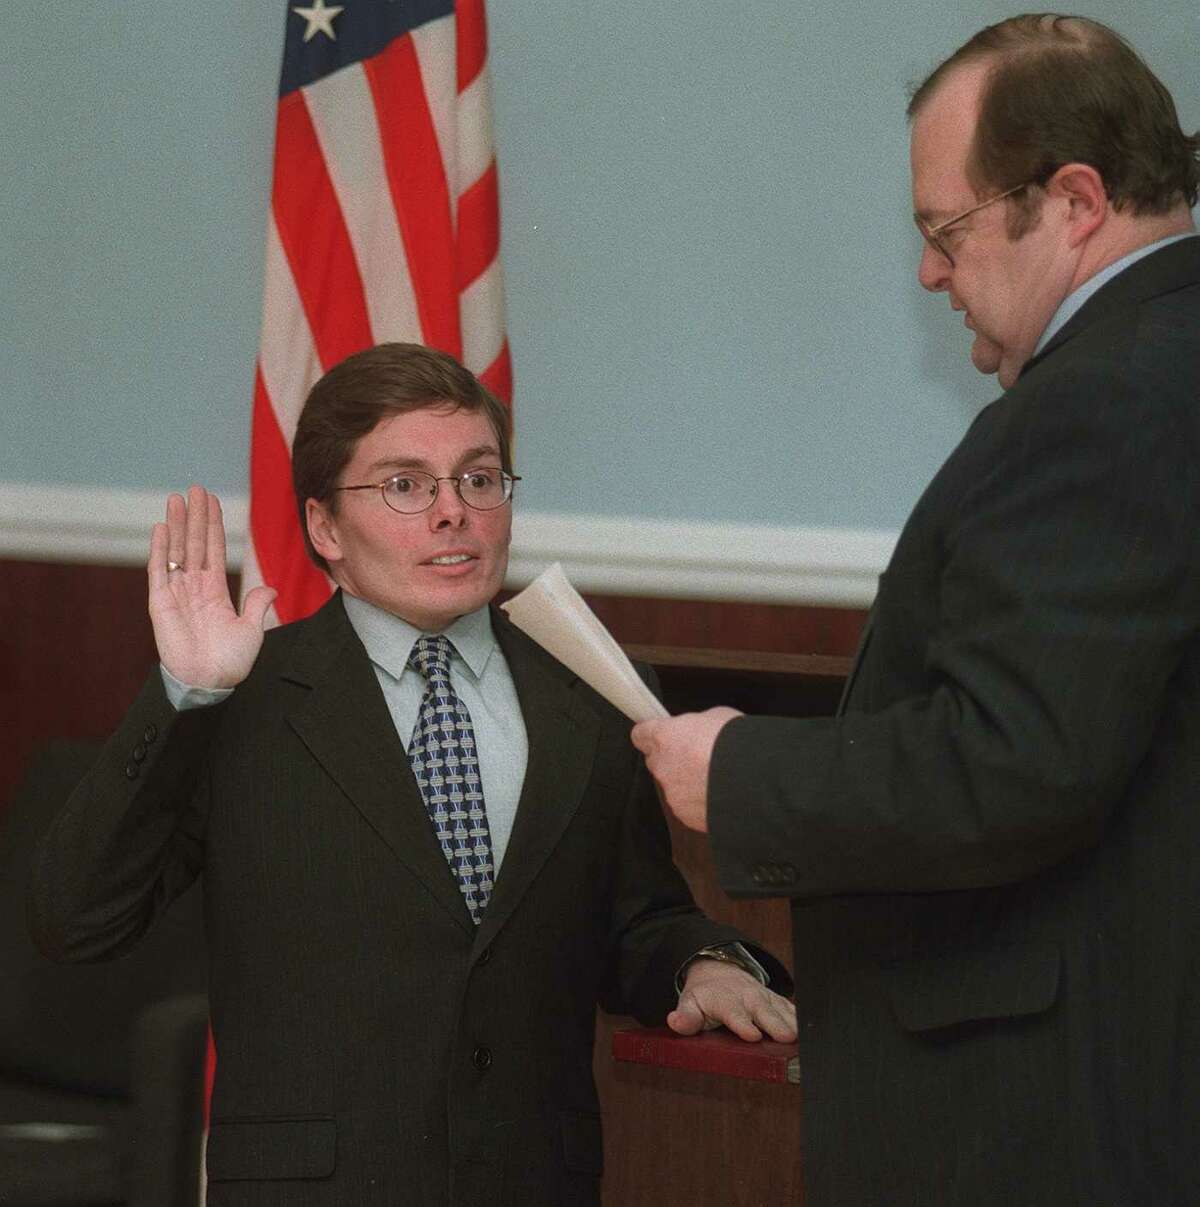 Martin Landgrebe, Probate Judge, of New Milford, Conn., is sworn in by Mayor Arthur Peitler, at Town Hall, Tuesday Jan. 5 1999.